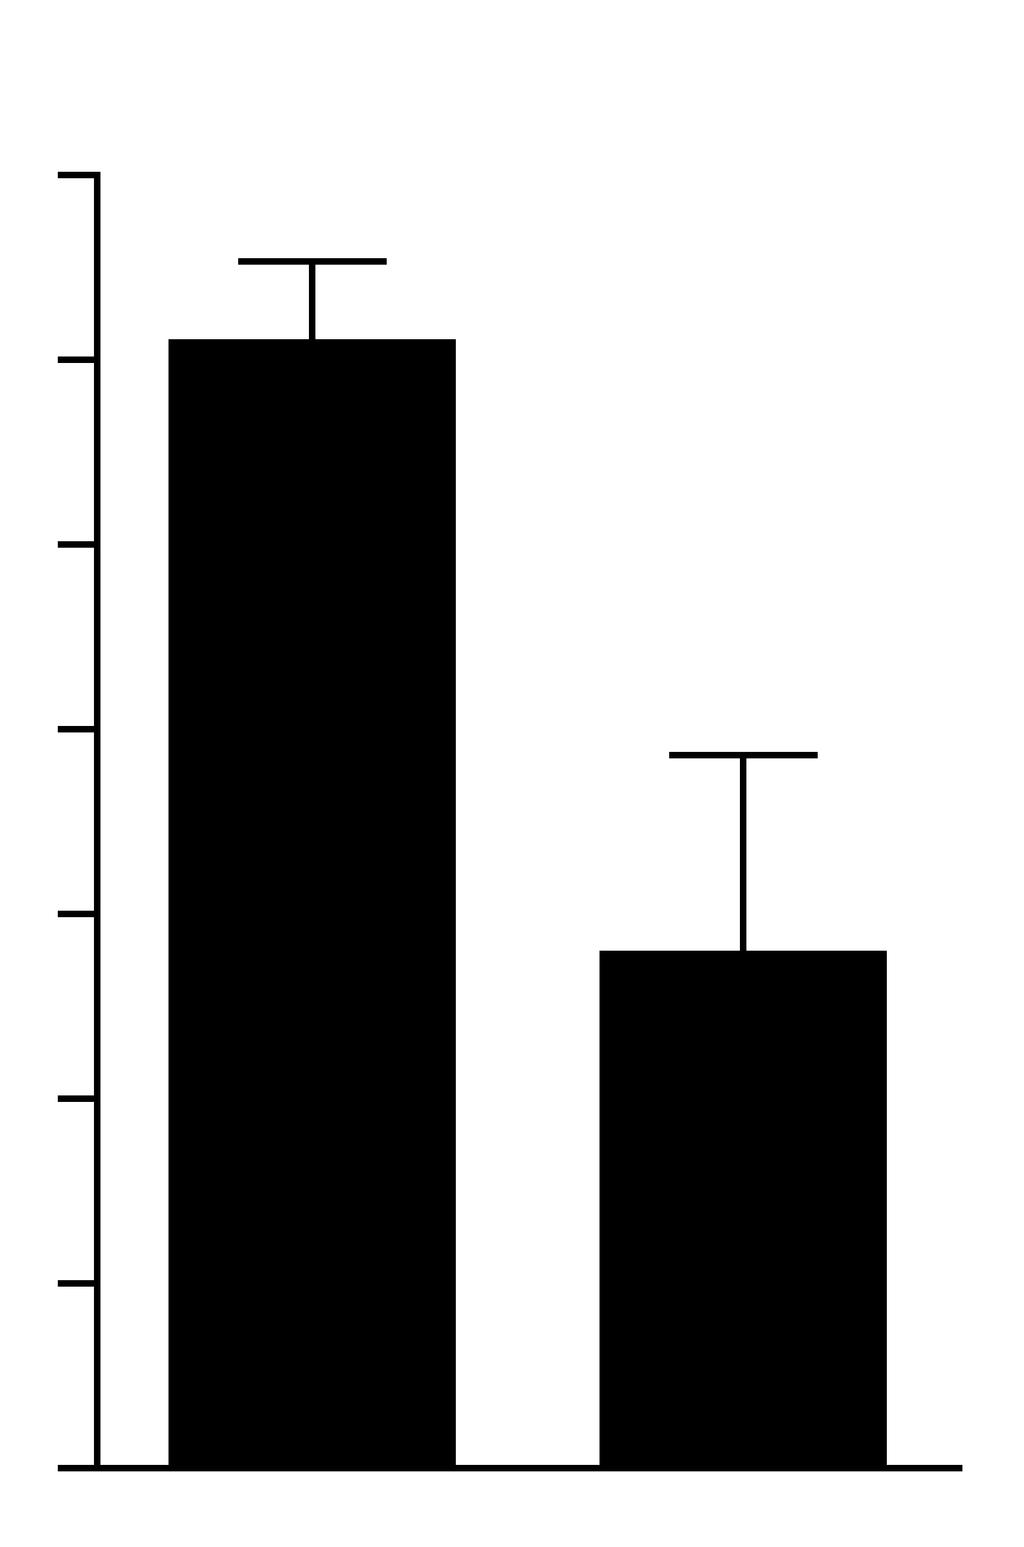 (A) Eotaxin-1 levels in whole lung lysates from wild-type mice 6 hours after intranasal treatment with PBS or chitin.